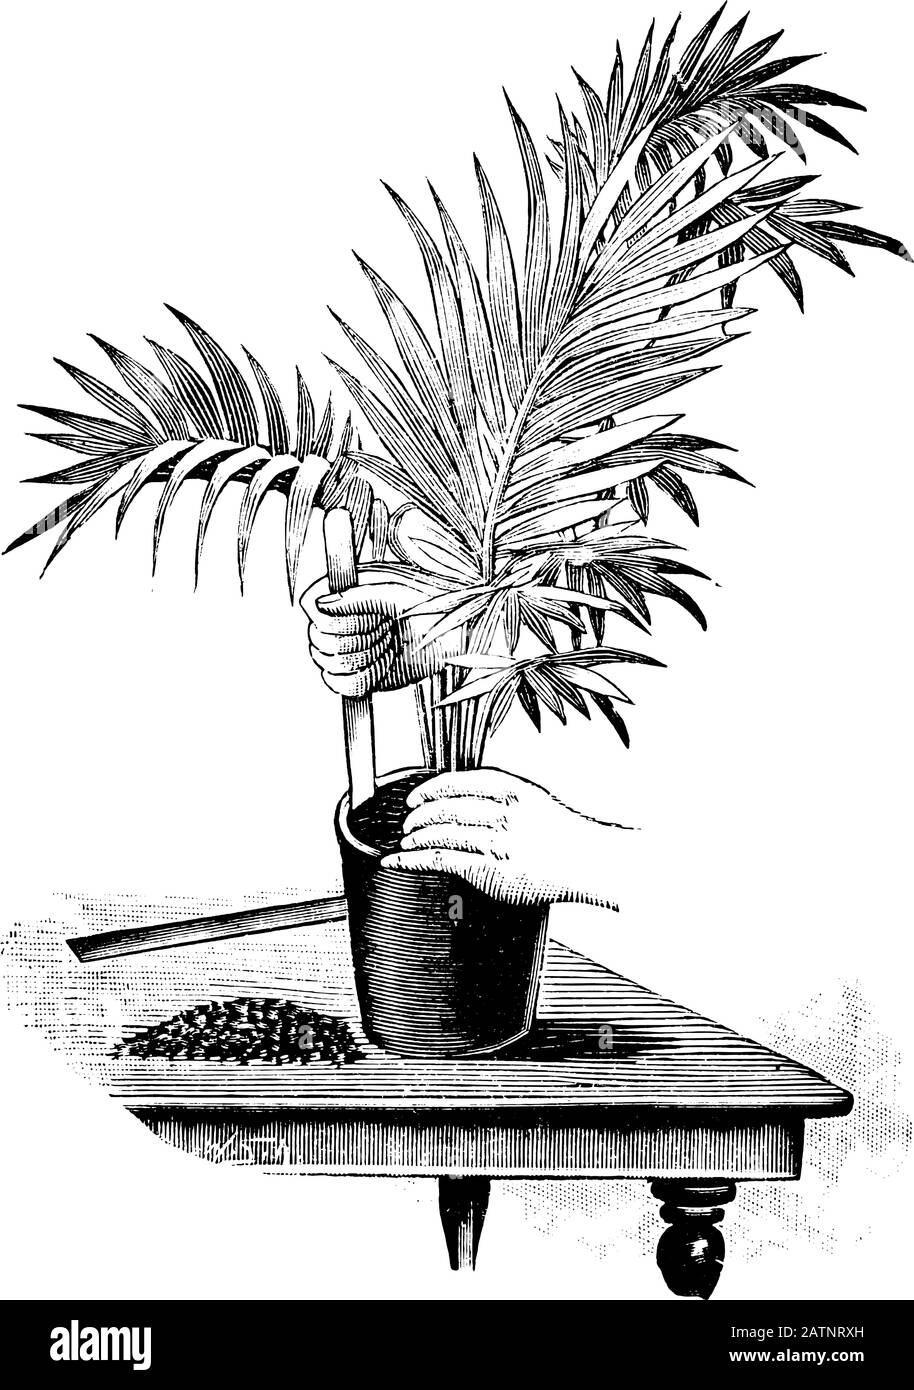 Antique vintage line art illustration, engraving or drawing of replanting or planting or repoting of young palm tree plant in pot. From book Plants in Room, Prague, 1898. Stock Vector